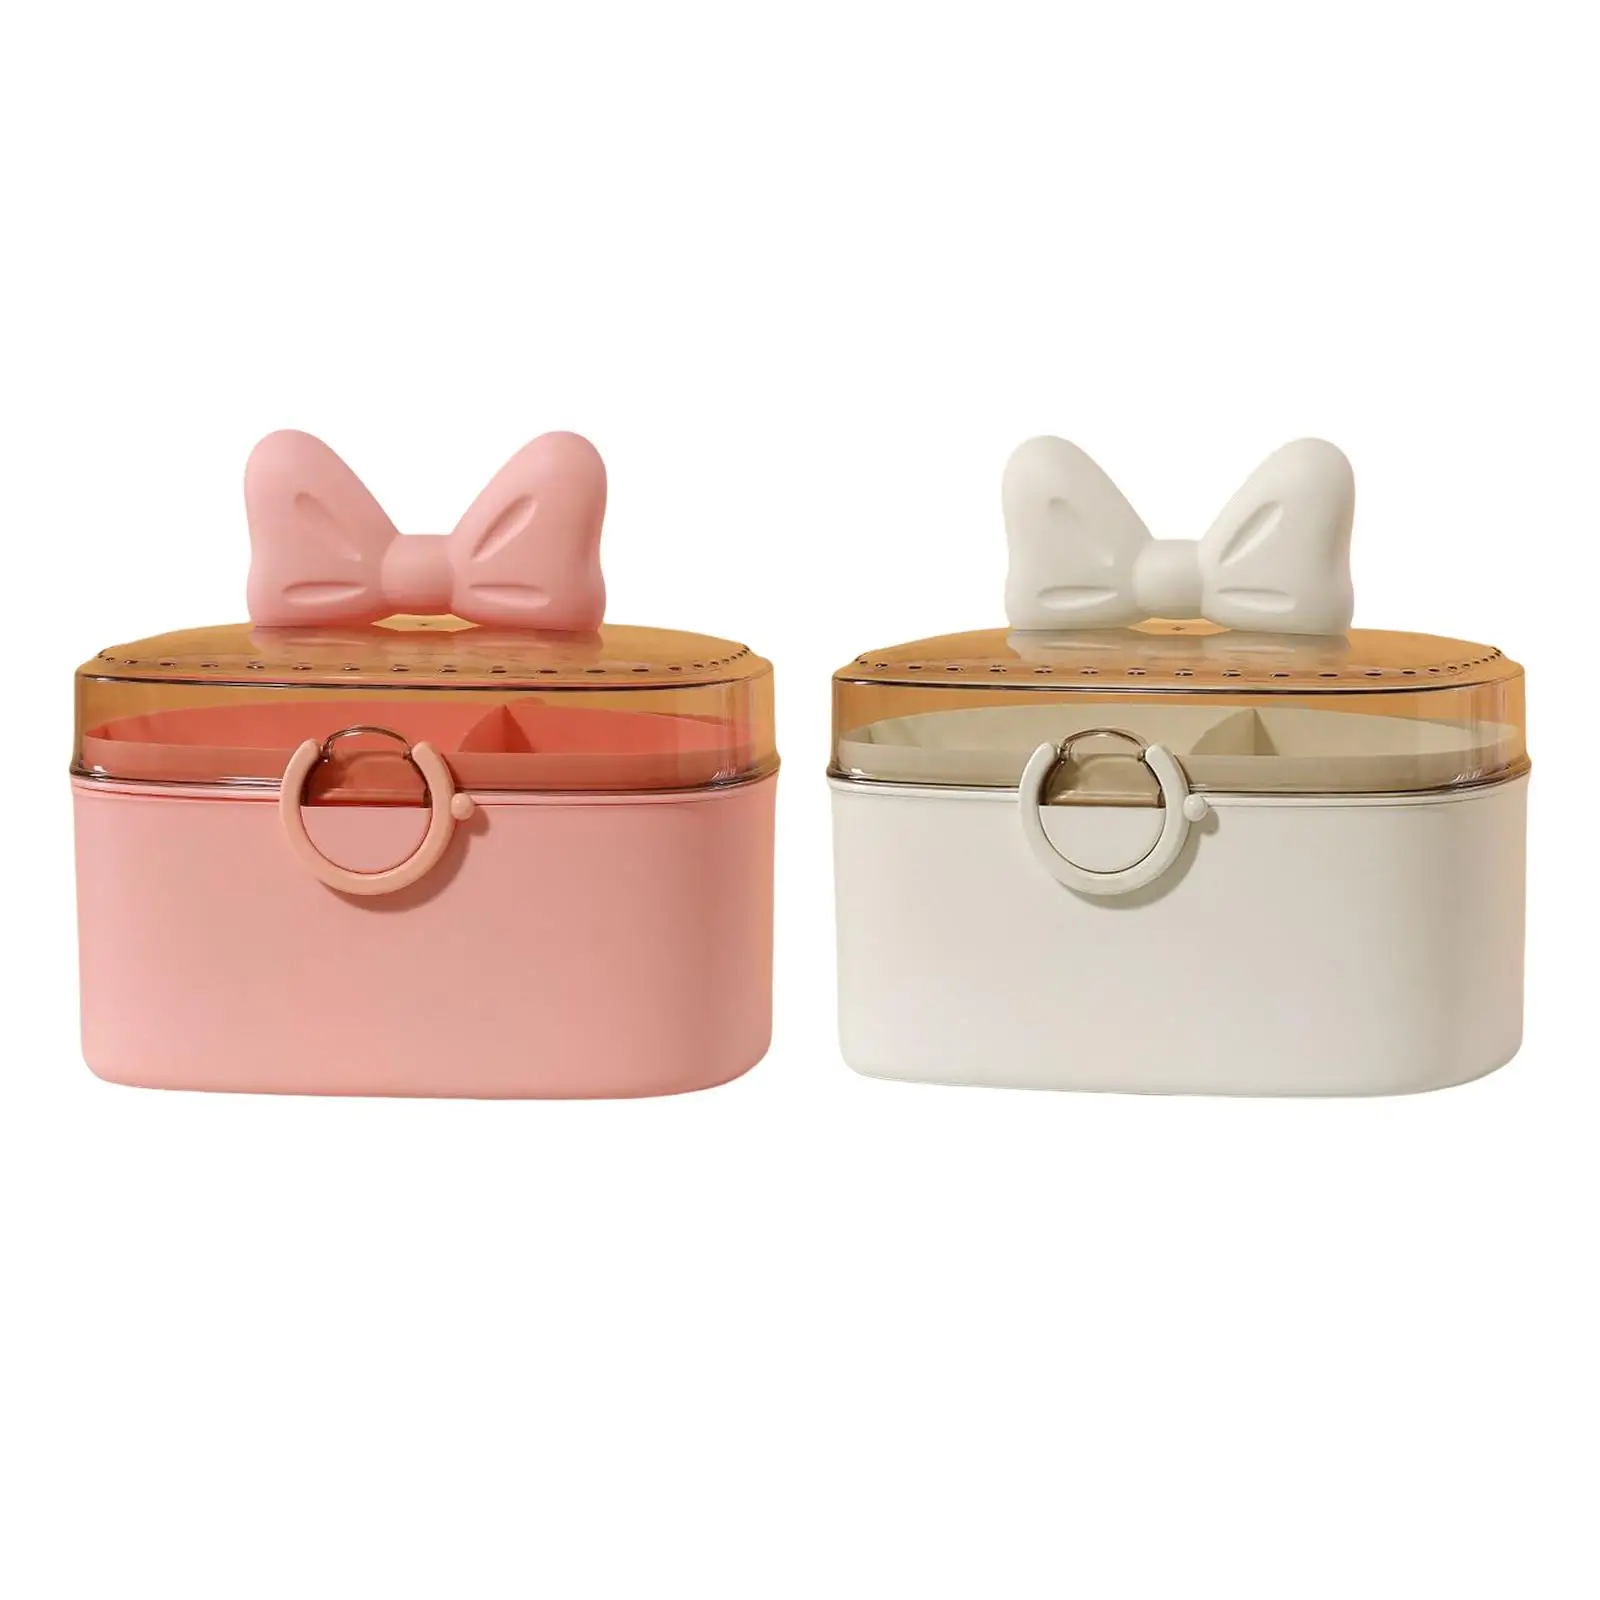 Cute Hair Accessories Storage Box Container for Hair Tie Headband Bracelets